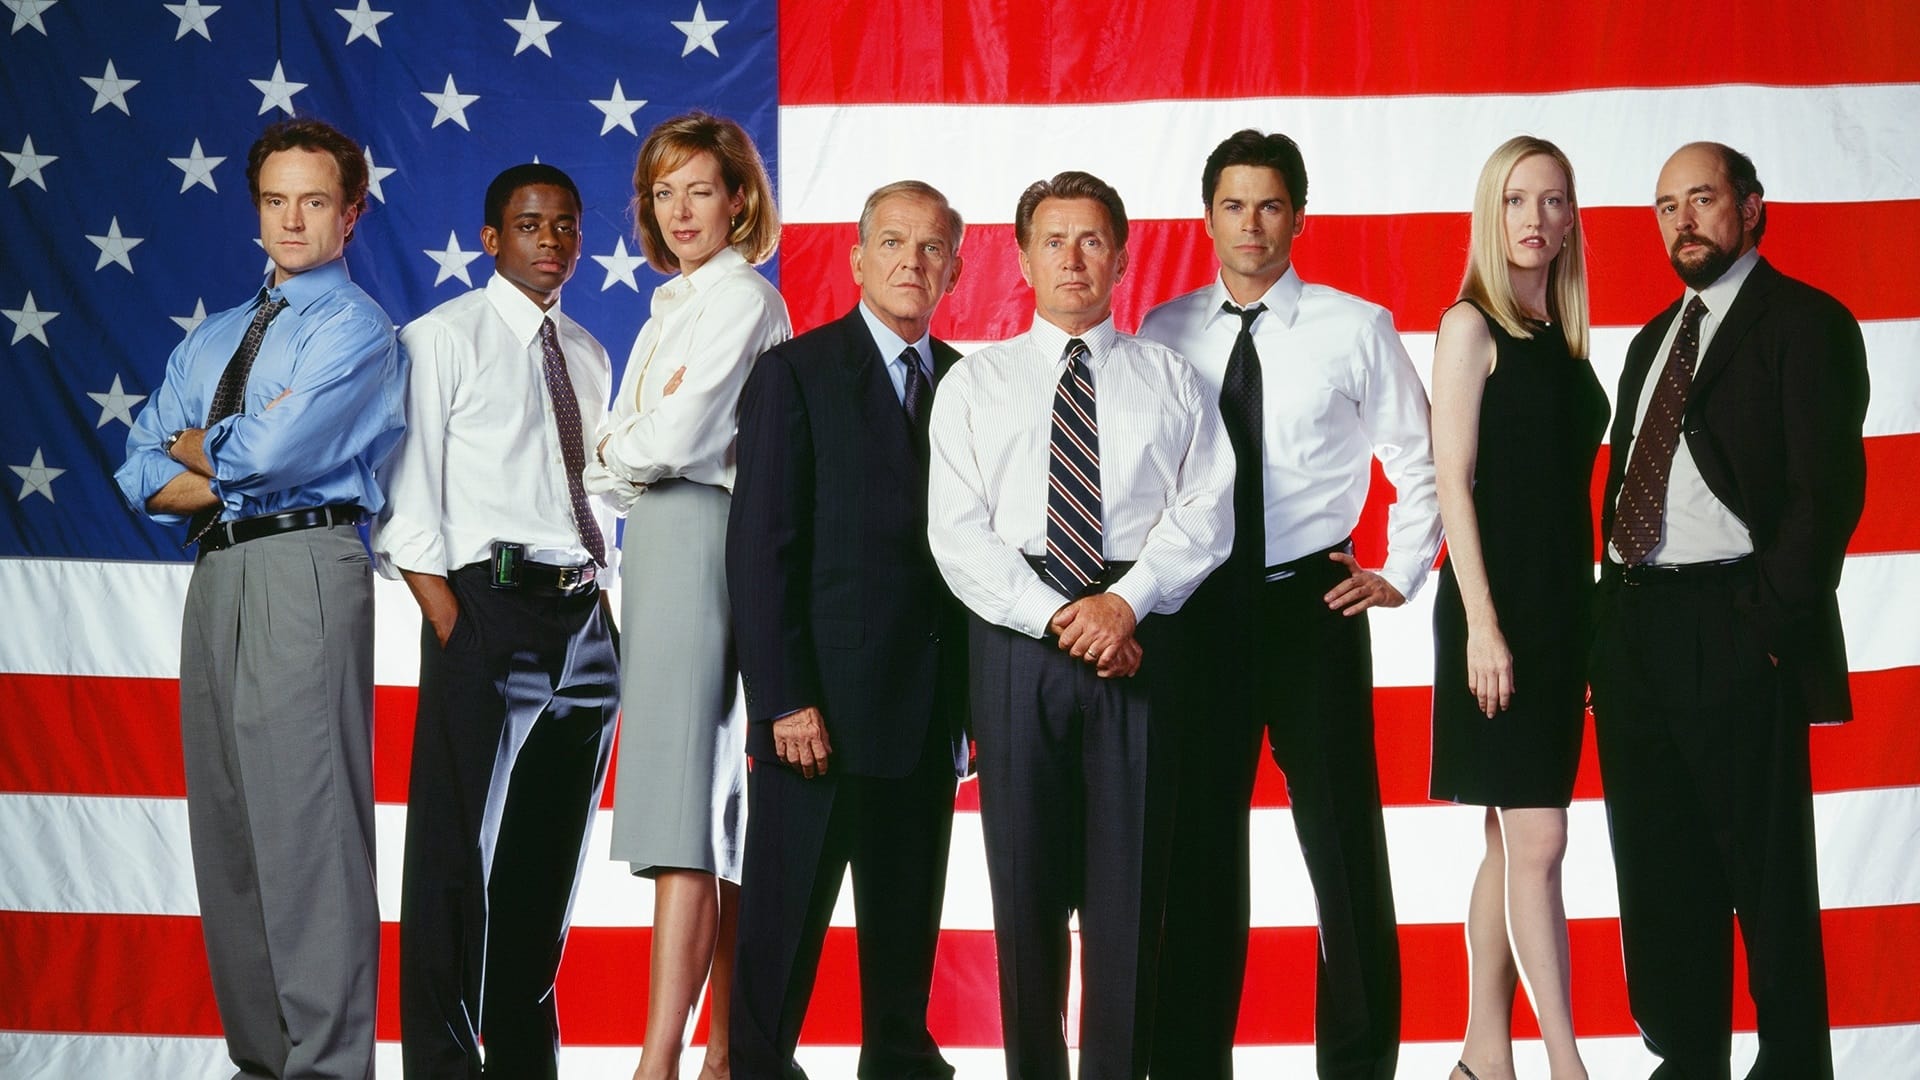 The West Wing - Season 7 Episode 2